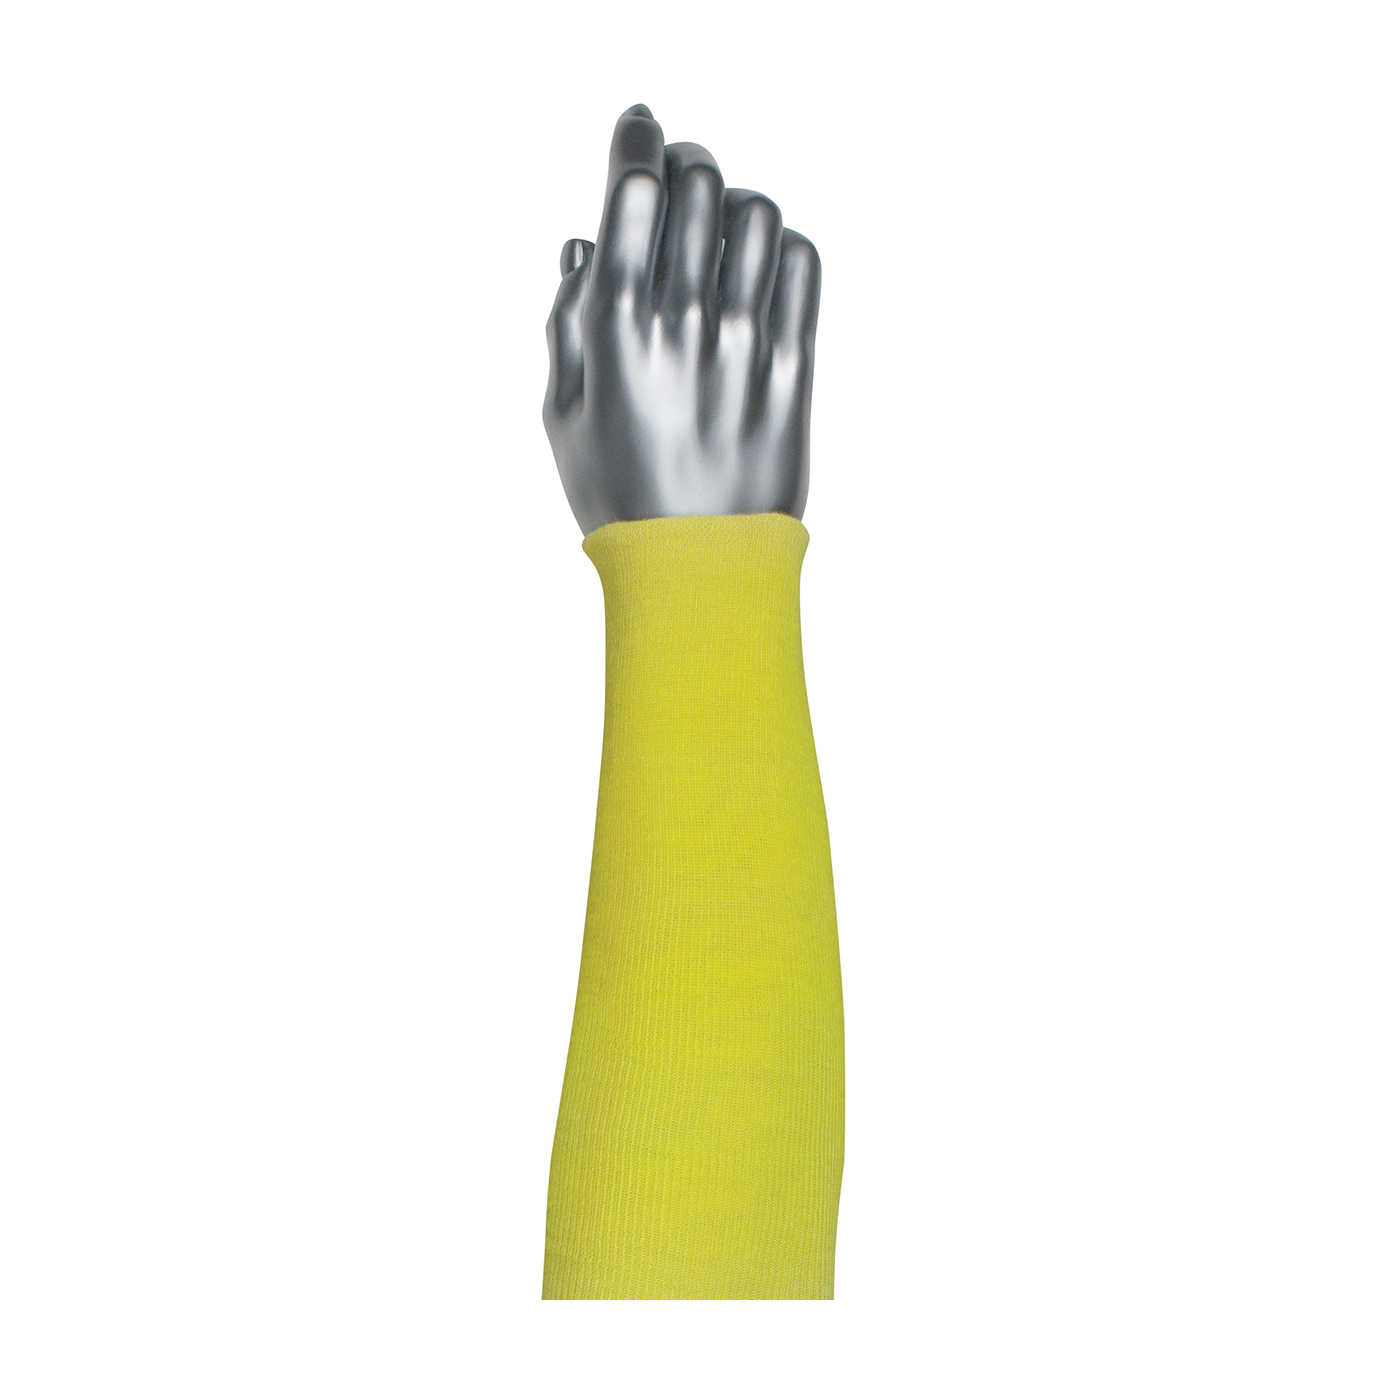 PIP® Kut Gard® 10-KS18CL 10-KSCL Cut-Resistant Sleeves, 3 in, 18 in L x 2 ply THK, Kevlar®/Cotton Liner, Yellow